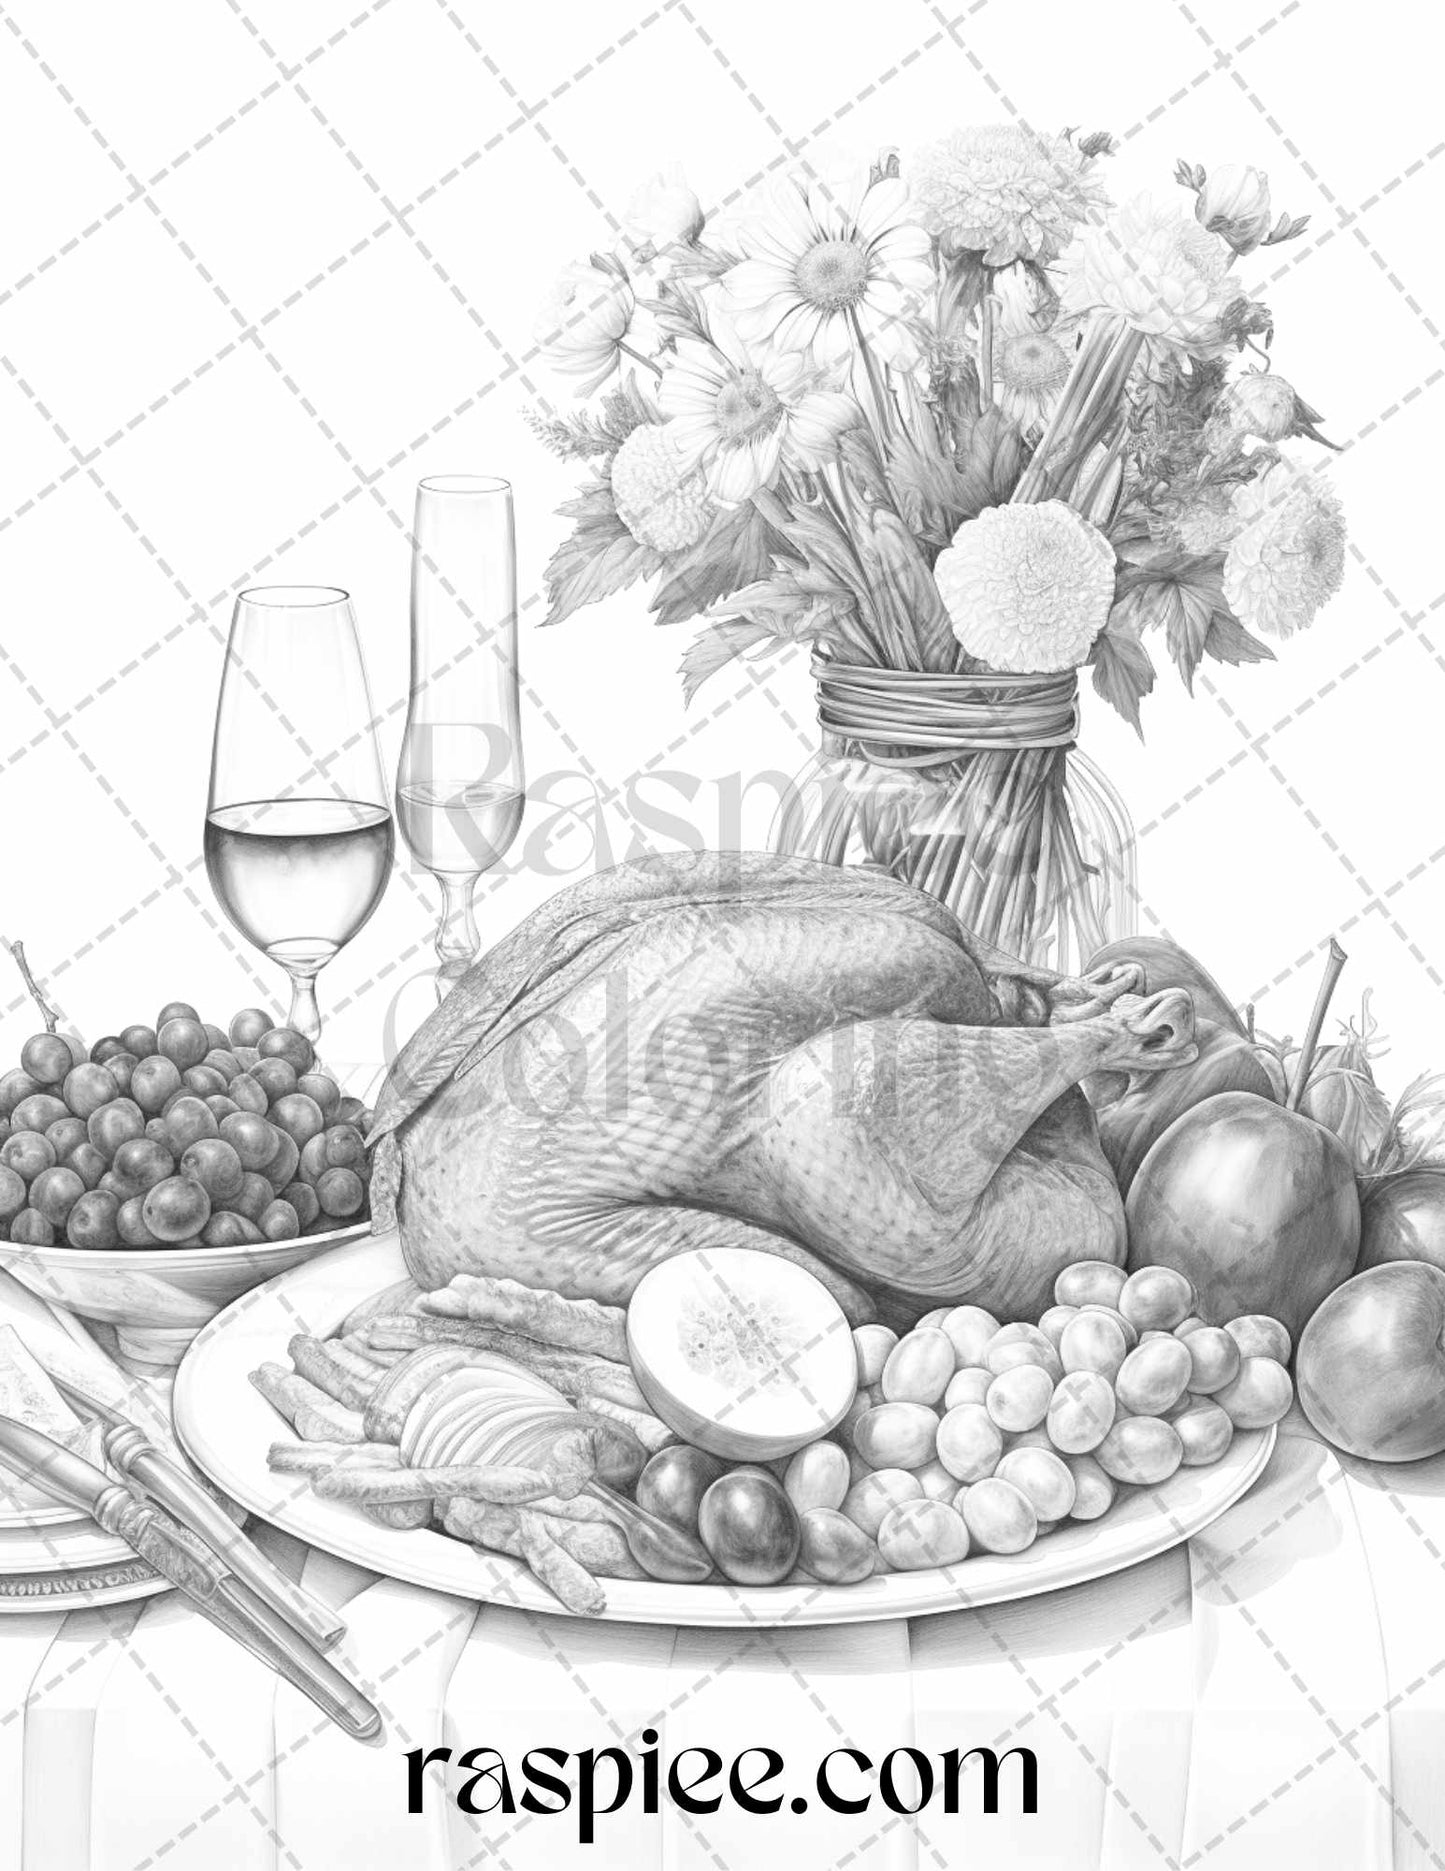 Thanksgiving Dinner Grayscale Printable Coloring Page, Adult Fall Coloring Activity, DIY Autumn Coloring Sheets, Instant Download Thanksgiving Coloring Art, Relaxing Holiday Coloring Pages, Holiday Coloring Pages for Adults